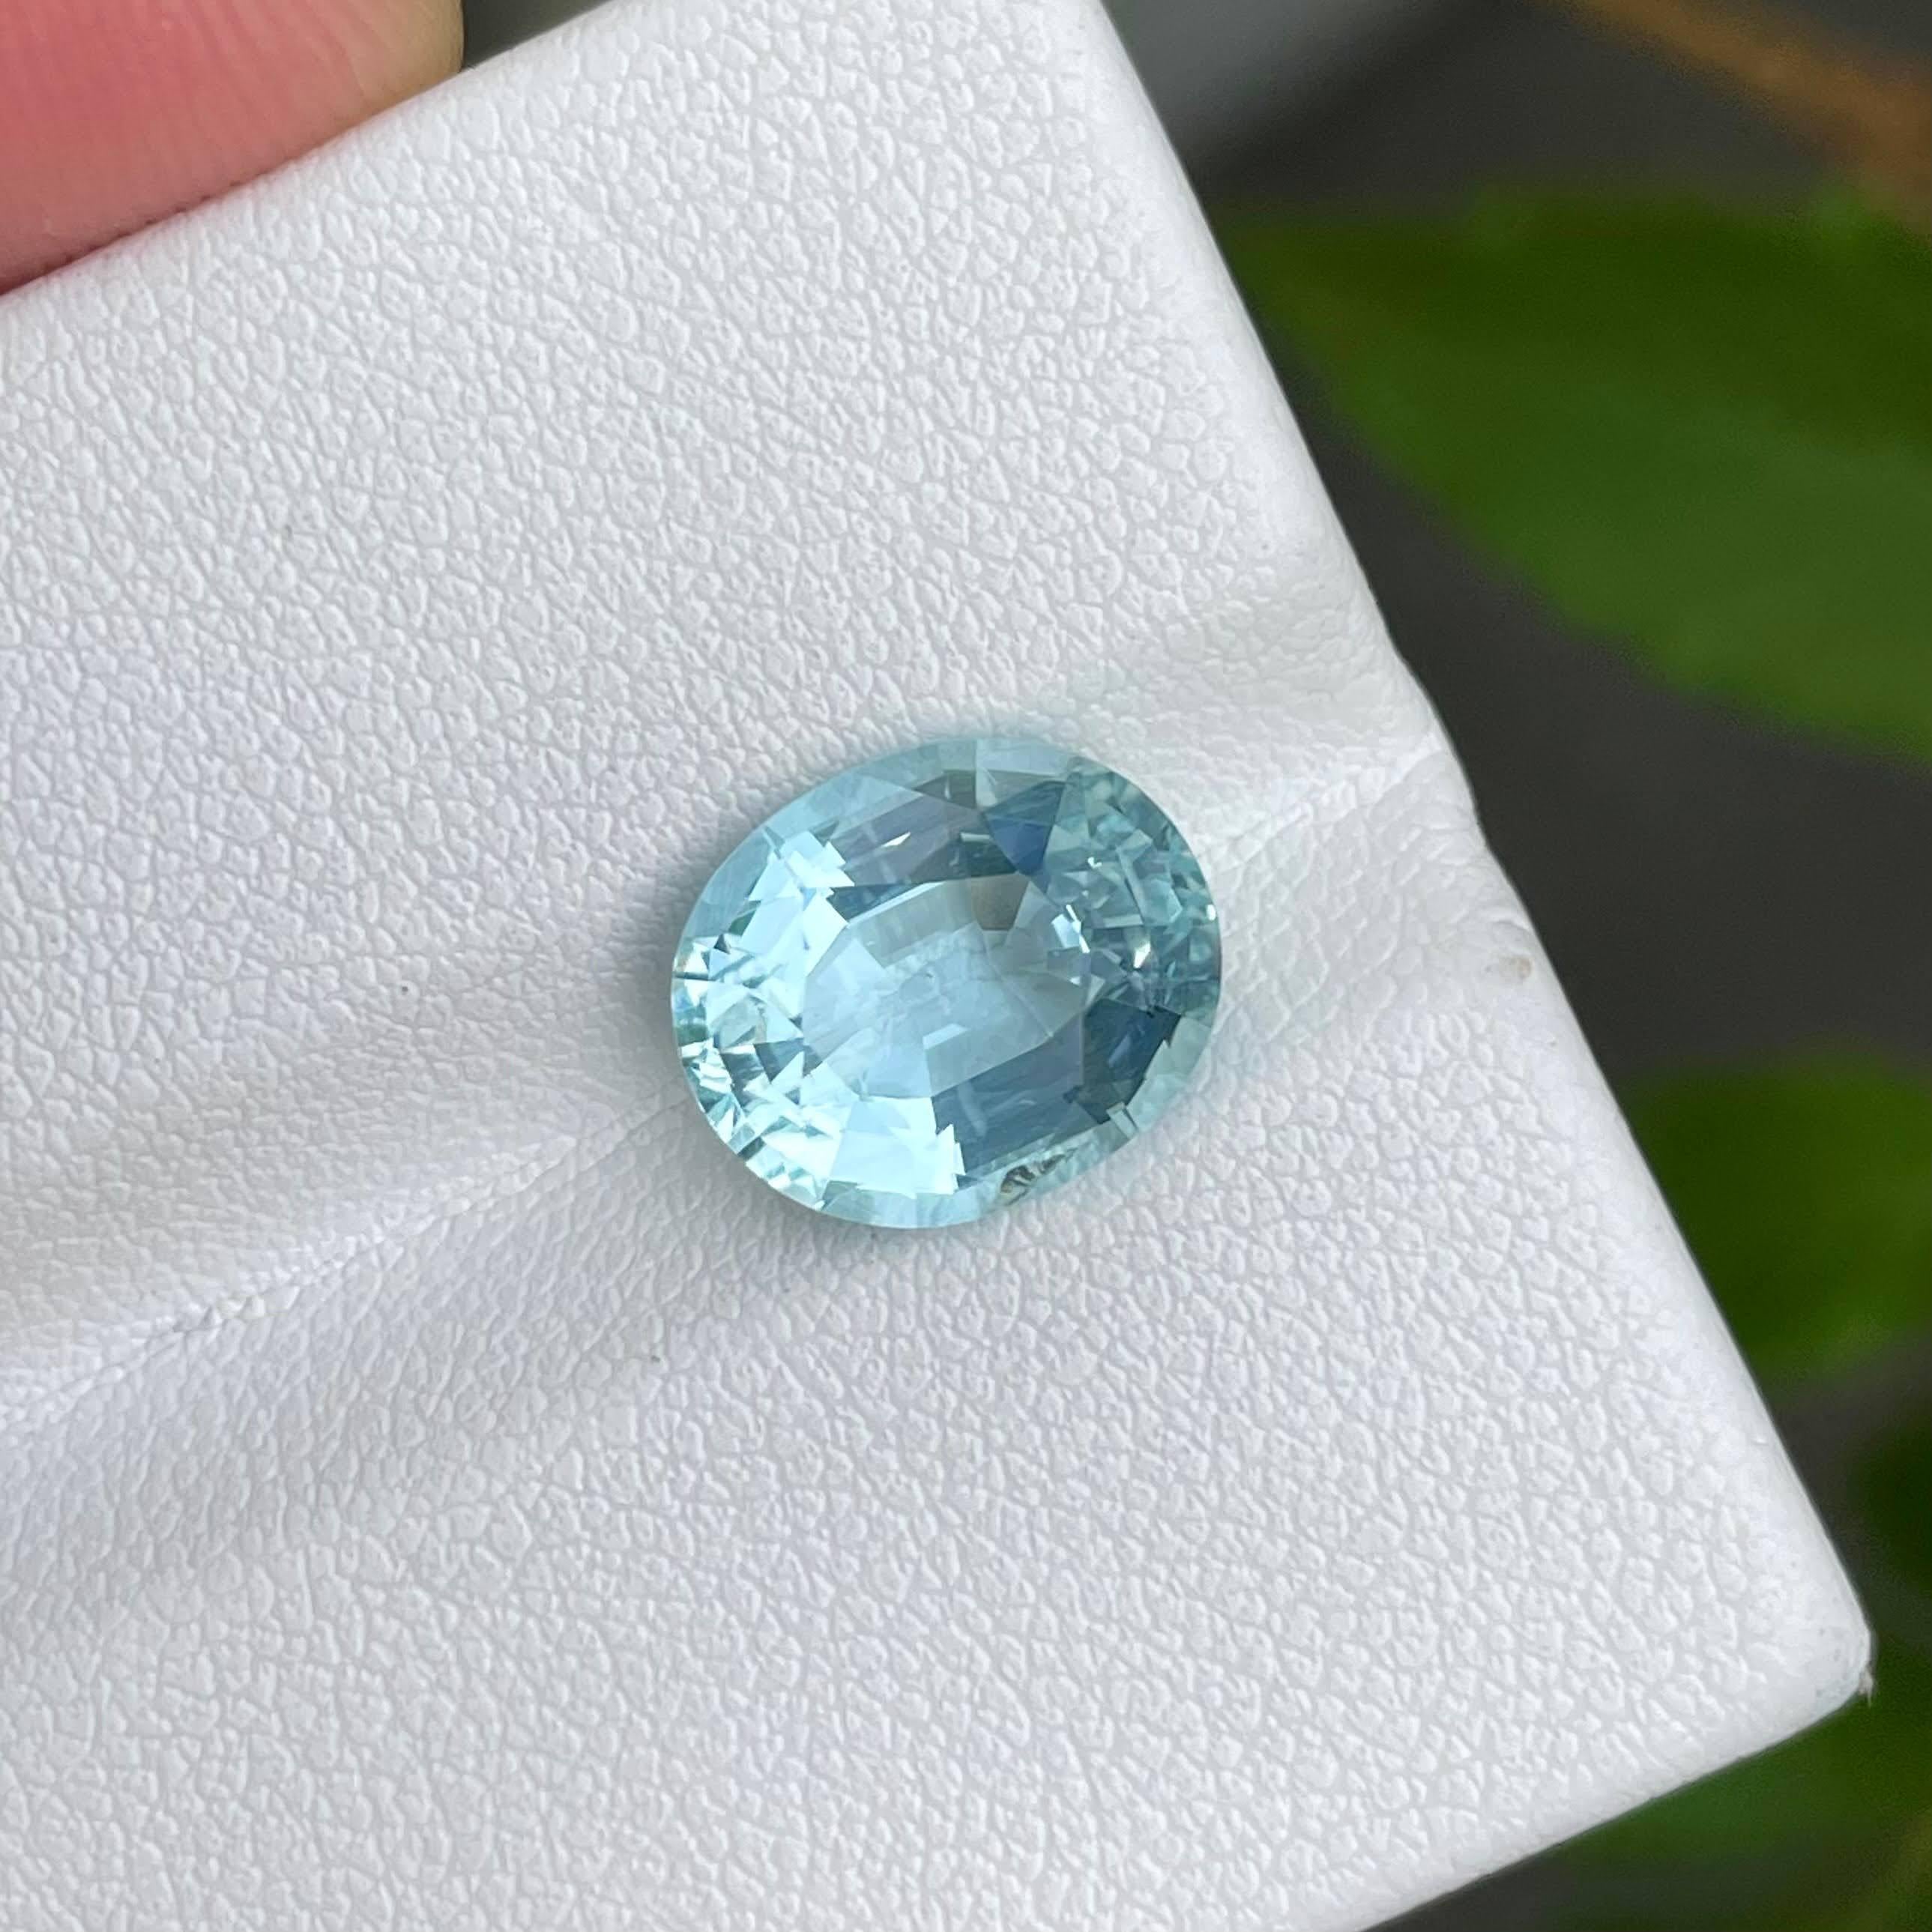 Weight 3.85 carats 
Dim 11.1x9.3x6.5 mm
Clarity VVS
Origin Madagascar
Treatment None
Shape Oval
Cut Step Oval





Radiating a timeless charm, a 3.85-carat Light Blue Aquamarine takes center stage with its enchanting Oval Cut, hailing from the